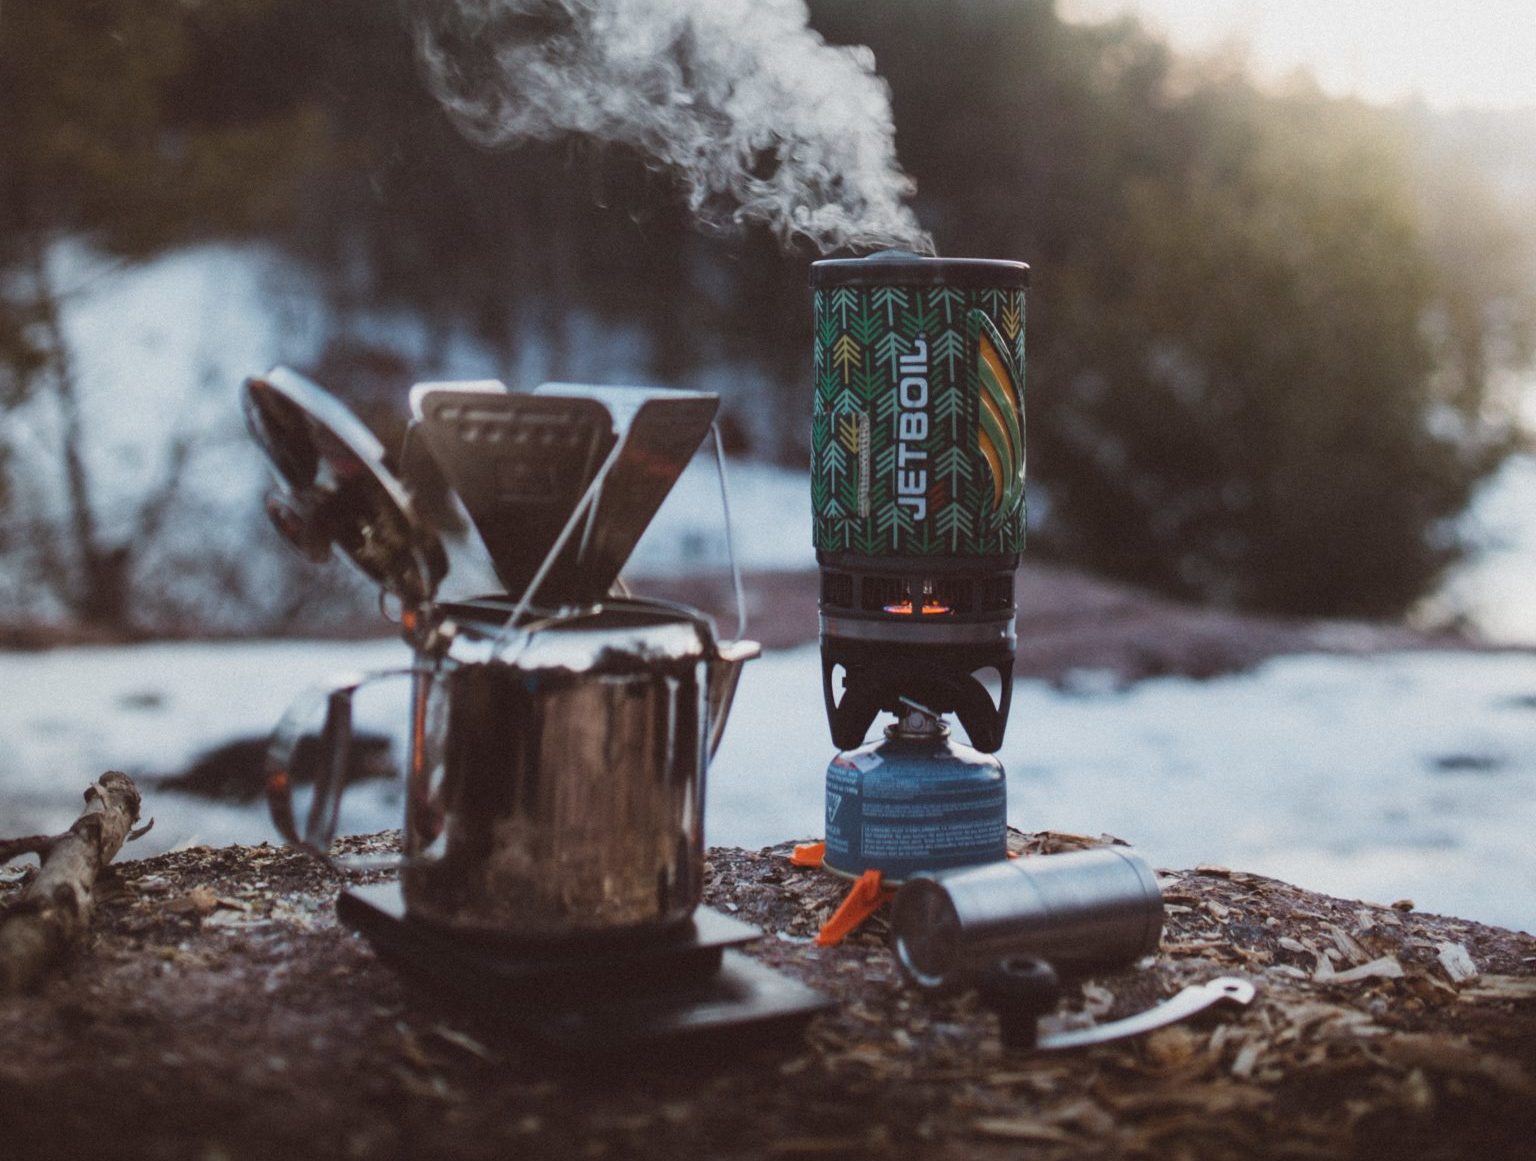 Camping Stove cooking